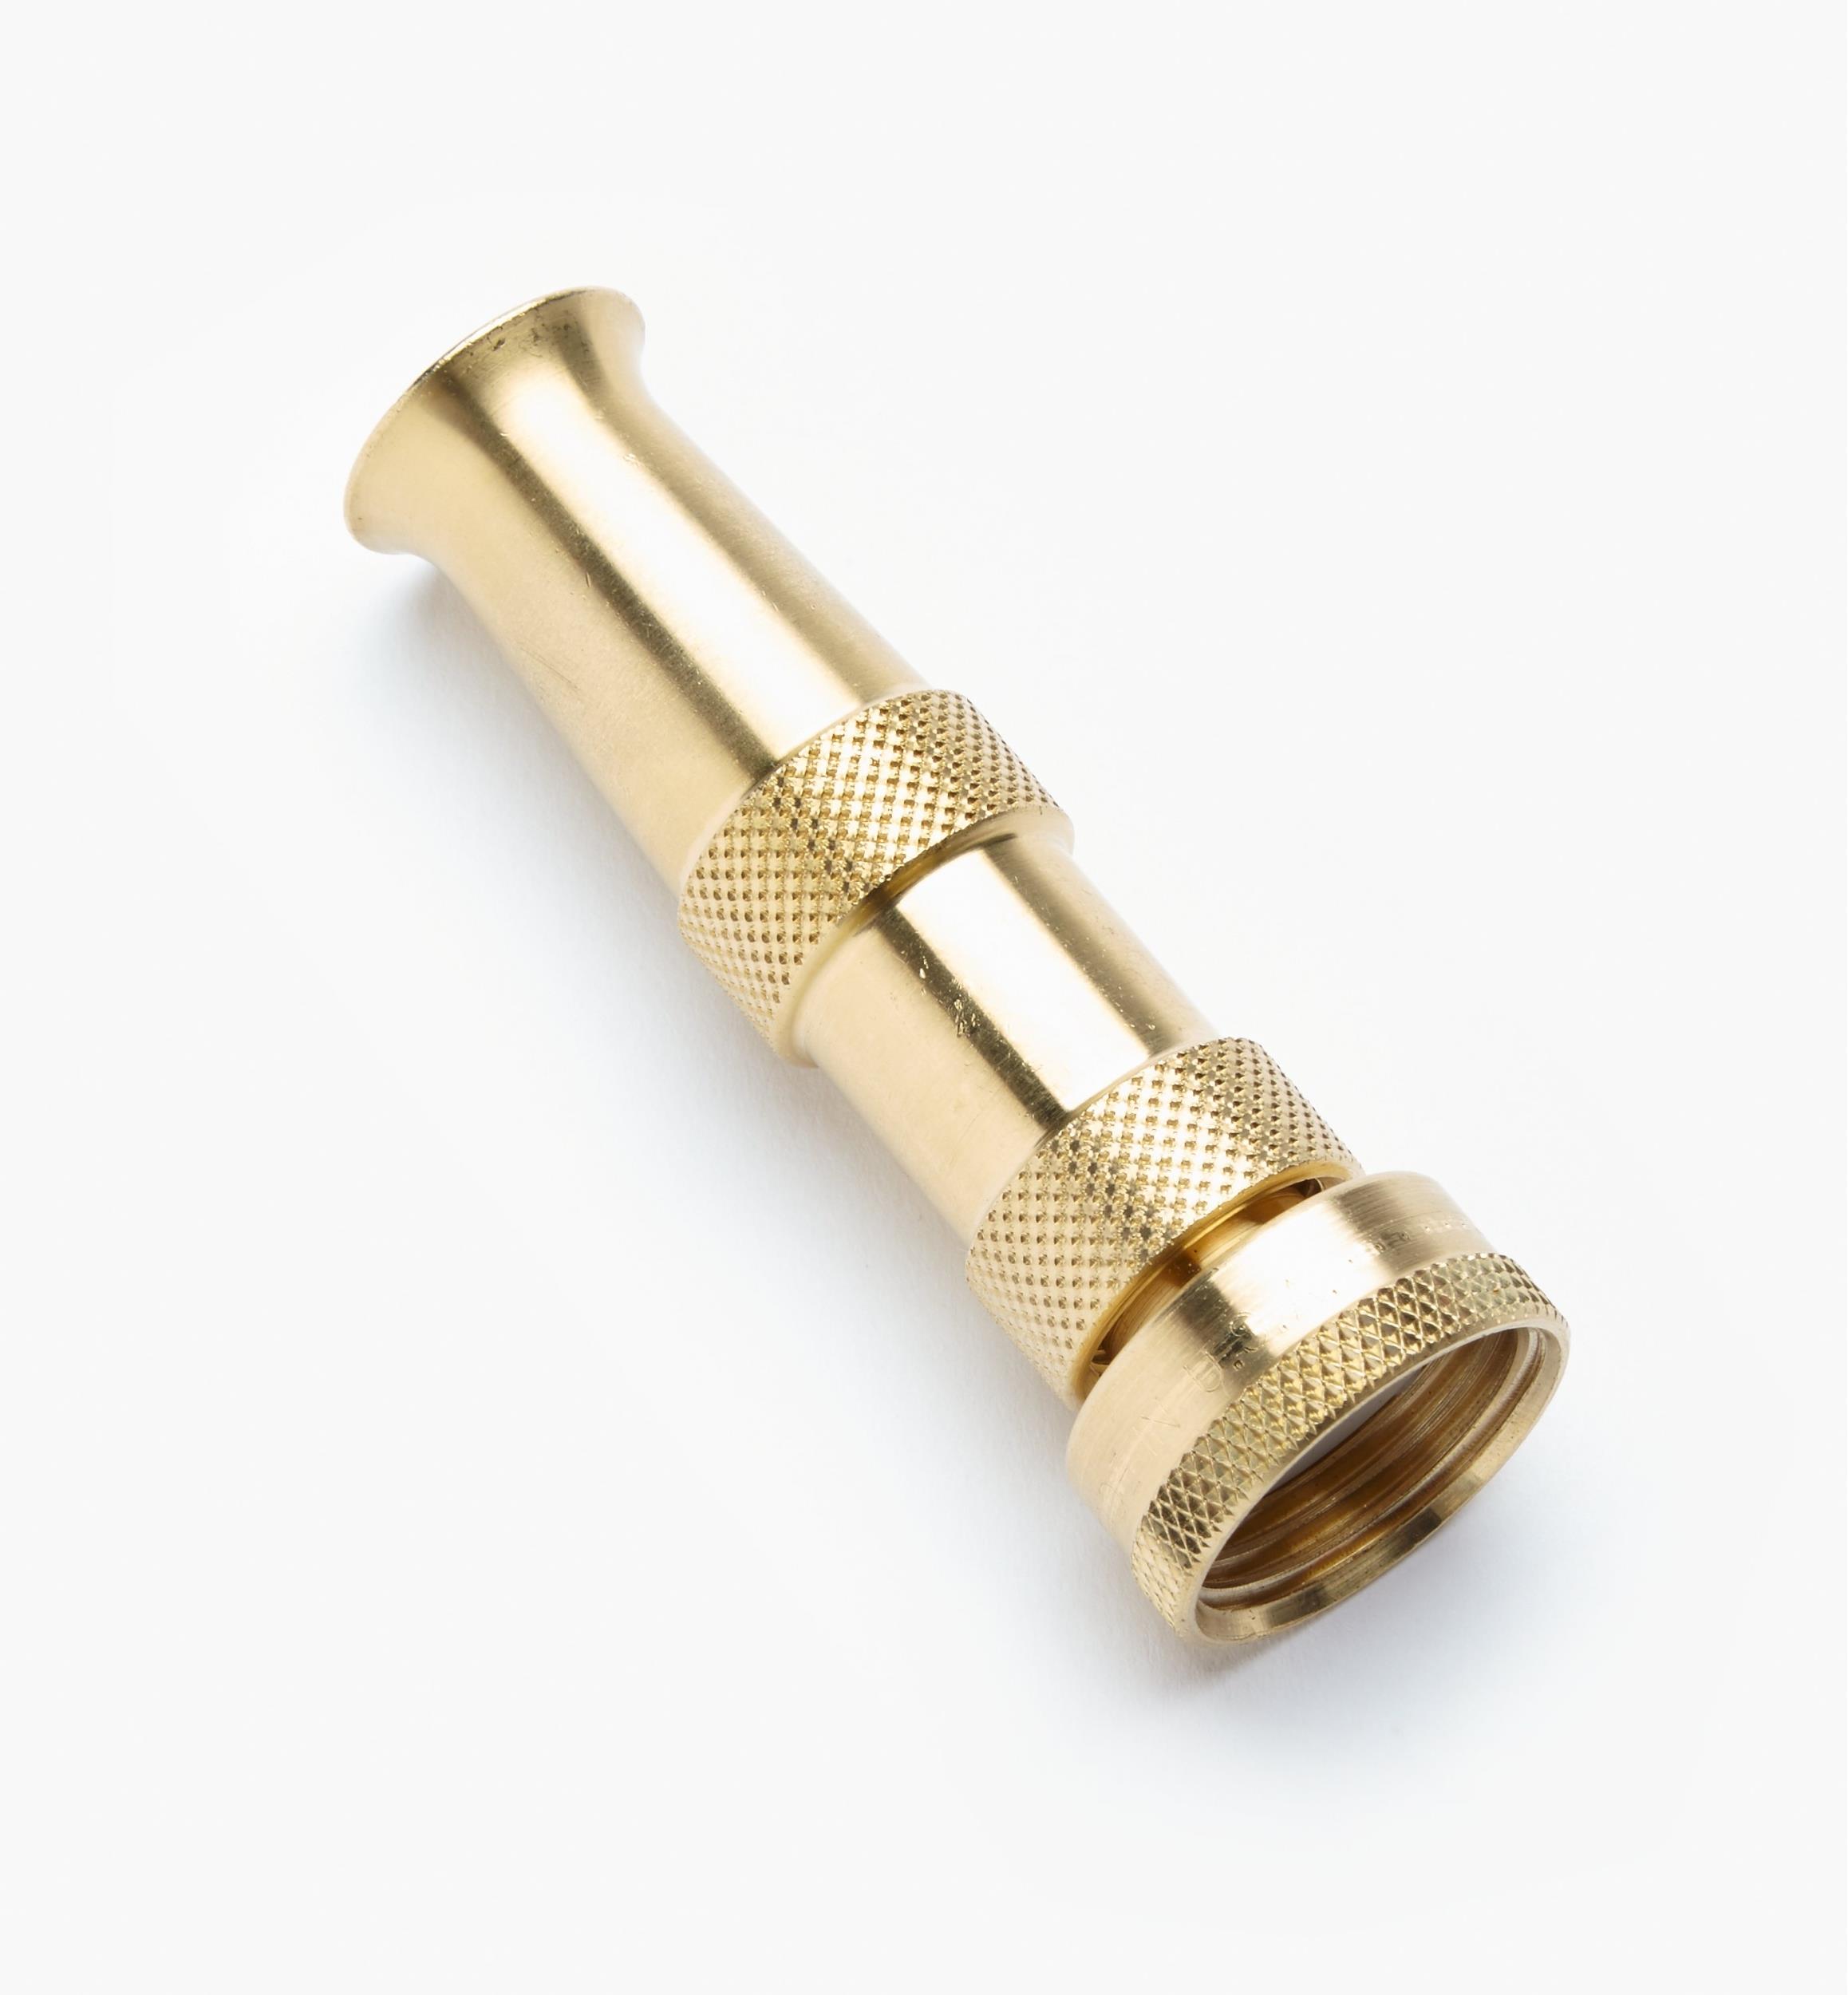 Brass Hose Nozzle - Lee Valley Tools